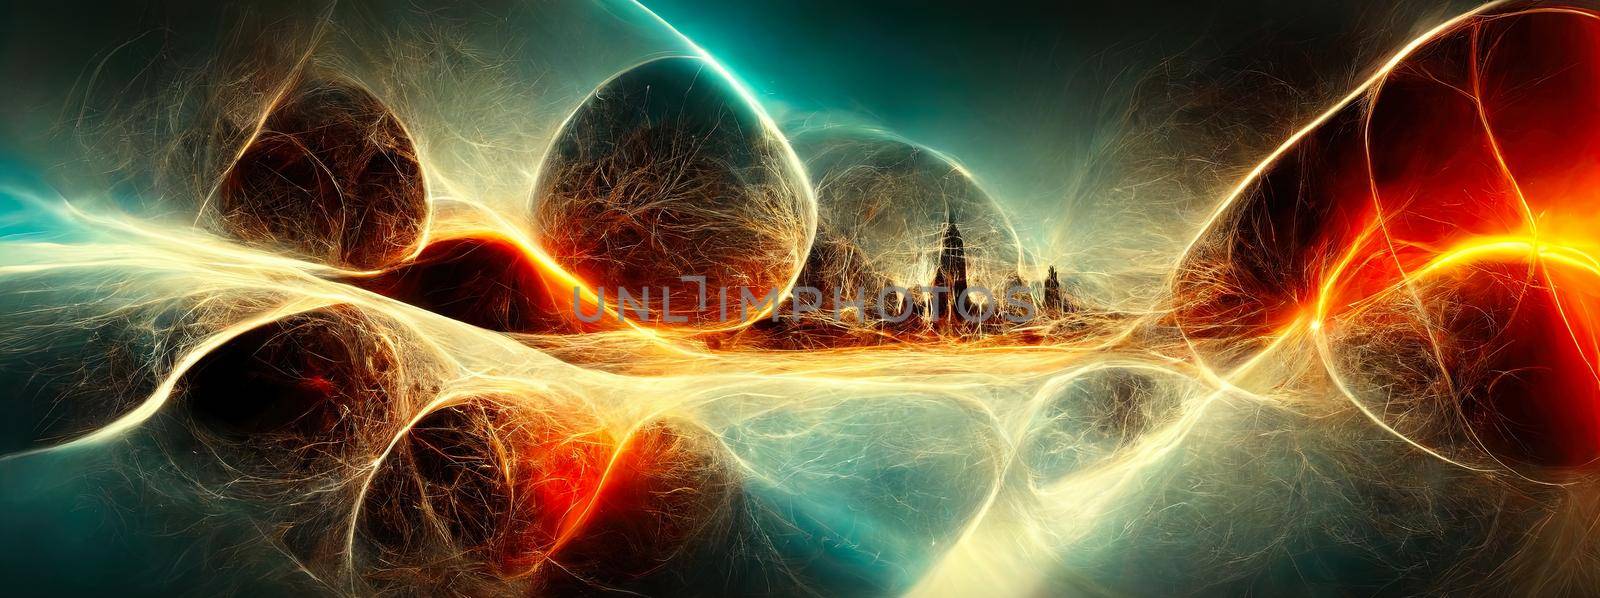 fantastic space landscape. Colorful abstract wallpaper texture background illustration by TRMK